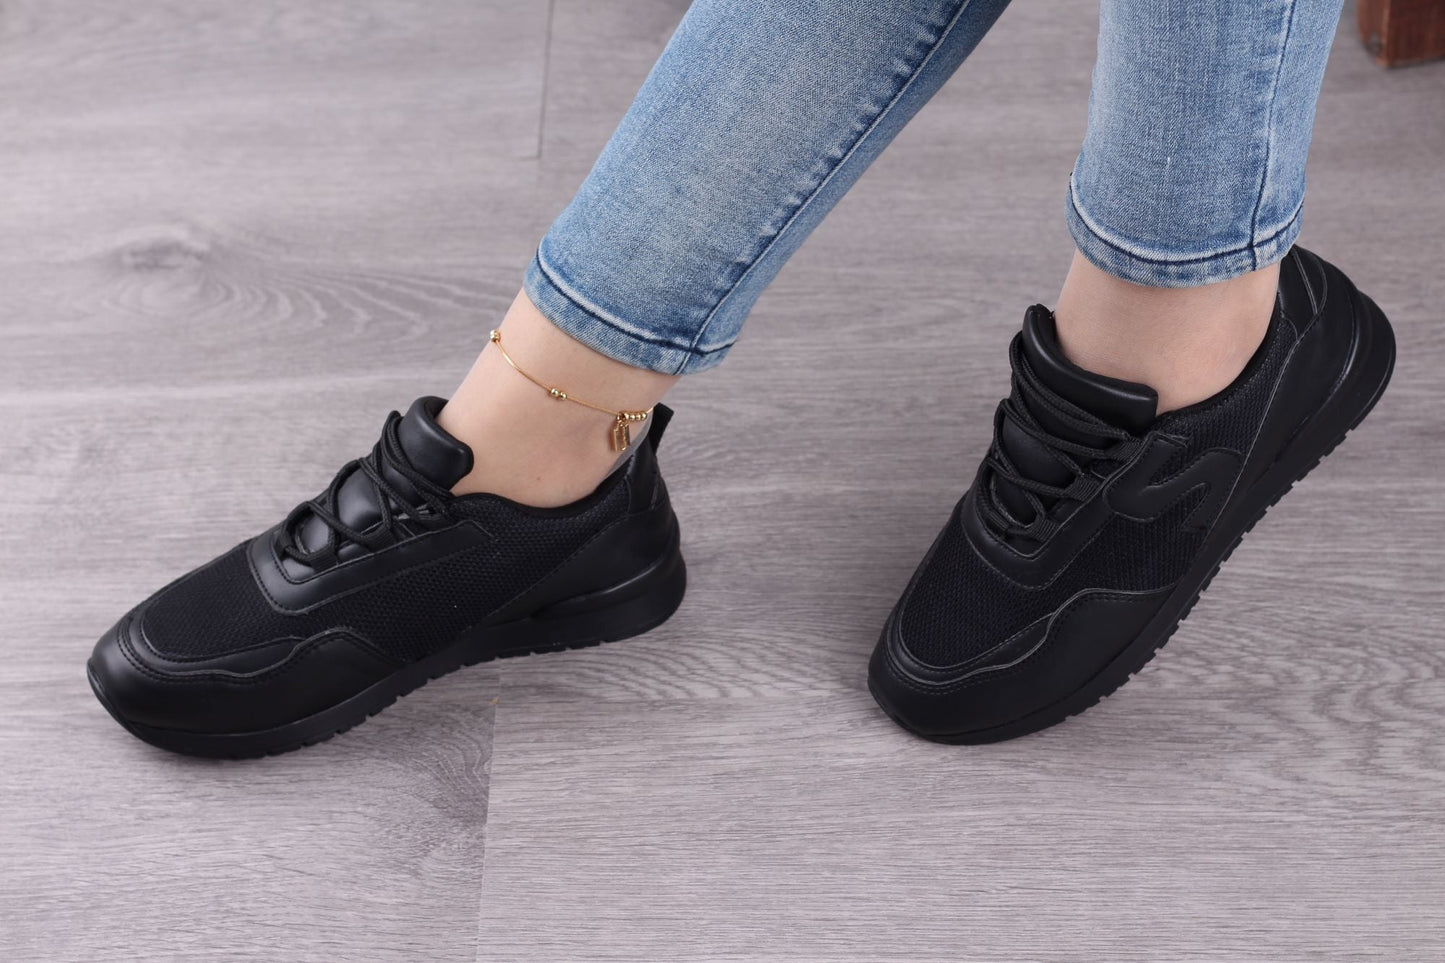 Black leather women's sneakers .International quality at local prices. Buy now leather sneakers from shoppingooo for the comfort of your feet